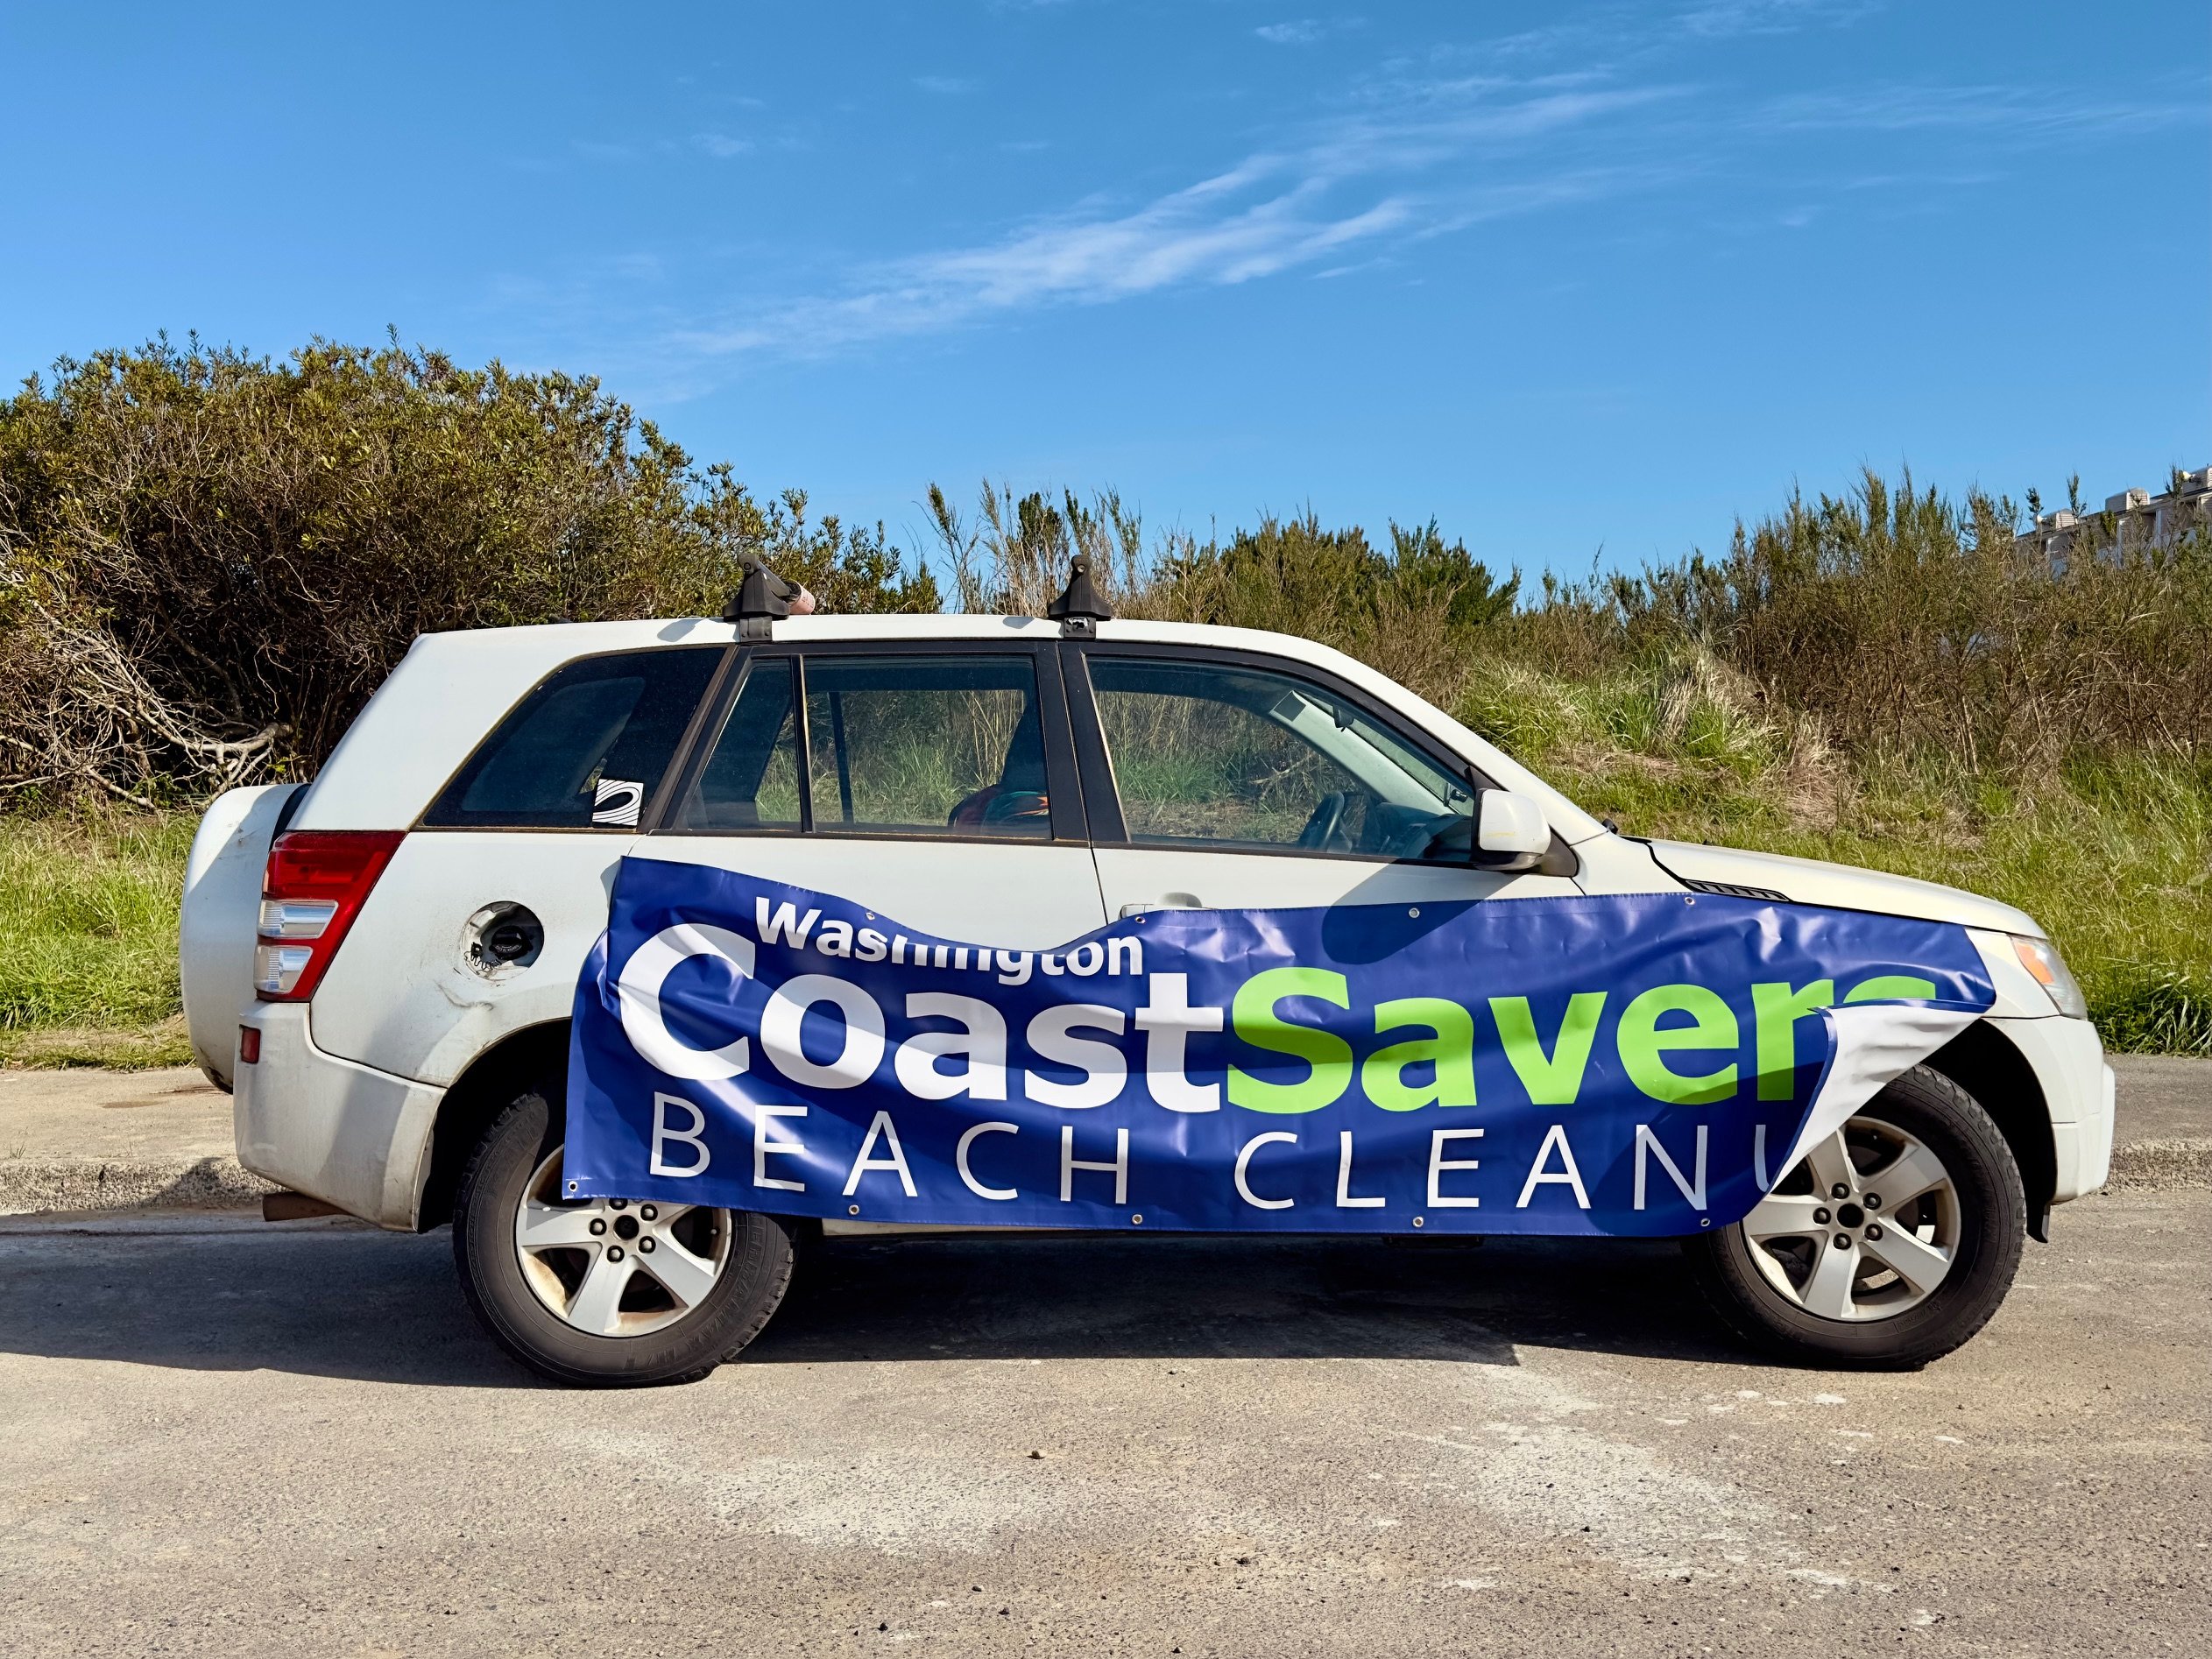 The Surfrider Suzuki holding up a large Coastsavers Beach Cleanup banner in front of dune scrub under blue skies